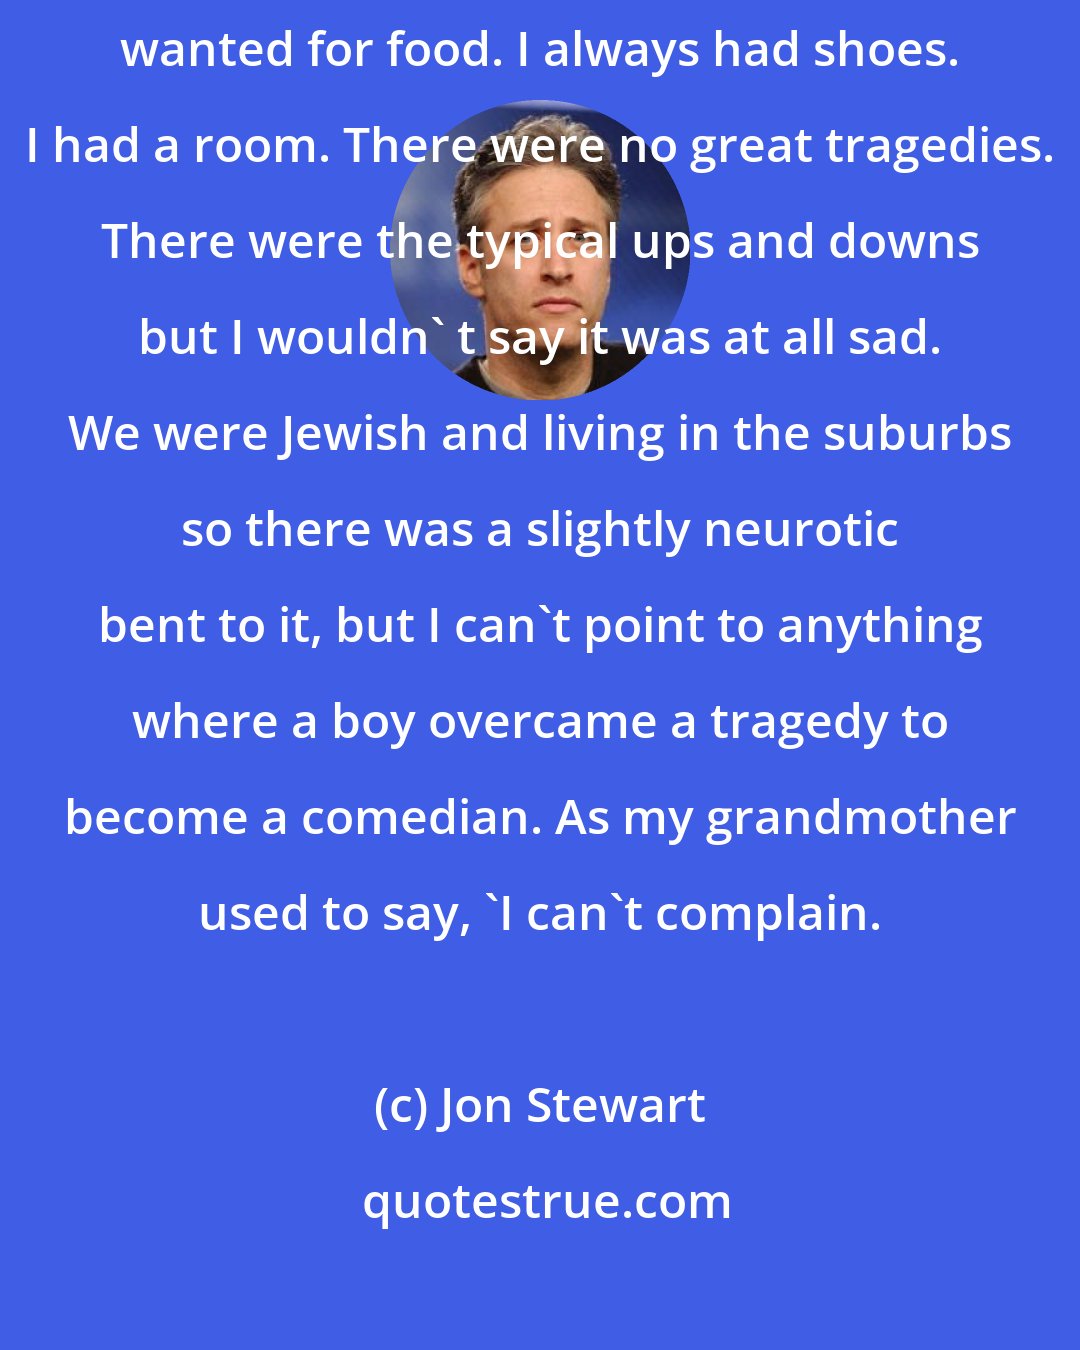 Jon Stewart: My life was typical. I played a little Little League baseball. I never wanted for food. I always had shoes. I had a room. There were no great tragedies. There were the typical ups and downs but I wouldn' t say it was at all sad. We were Jewish and living in the suburbs so there was a slightly neurotic bent to it, but I can't point to anything where a boy overcame a tragedy to become a comedian. As my grandmother used to say, 'I can't complain.